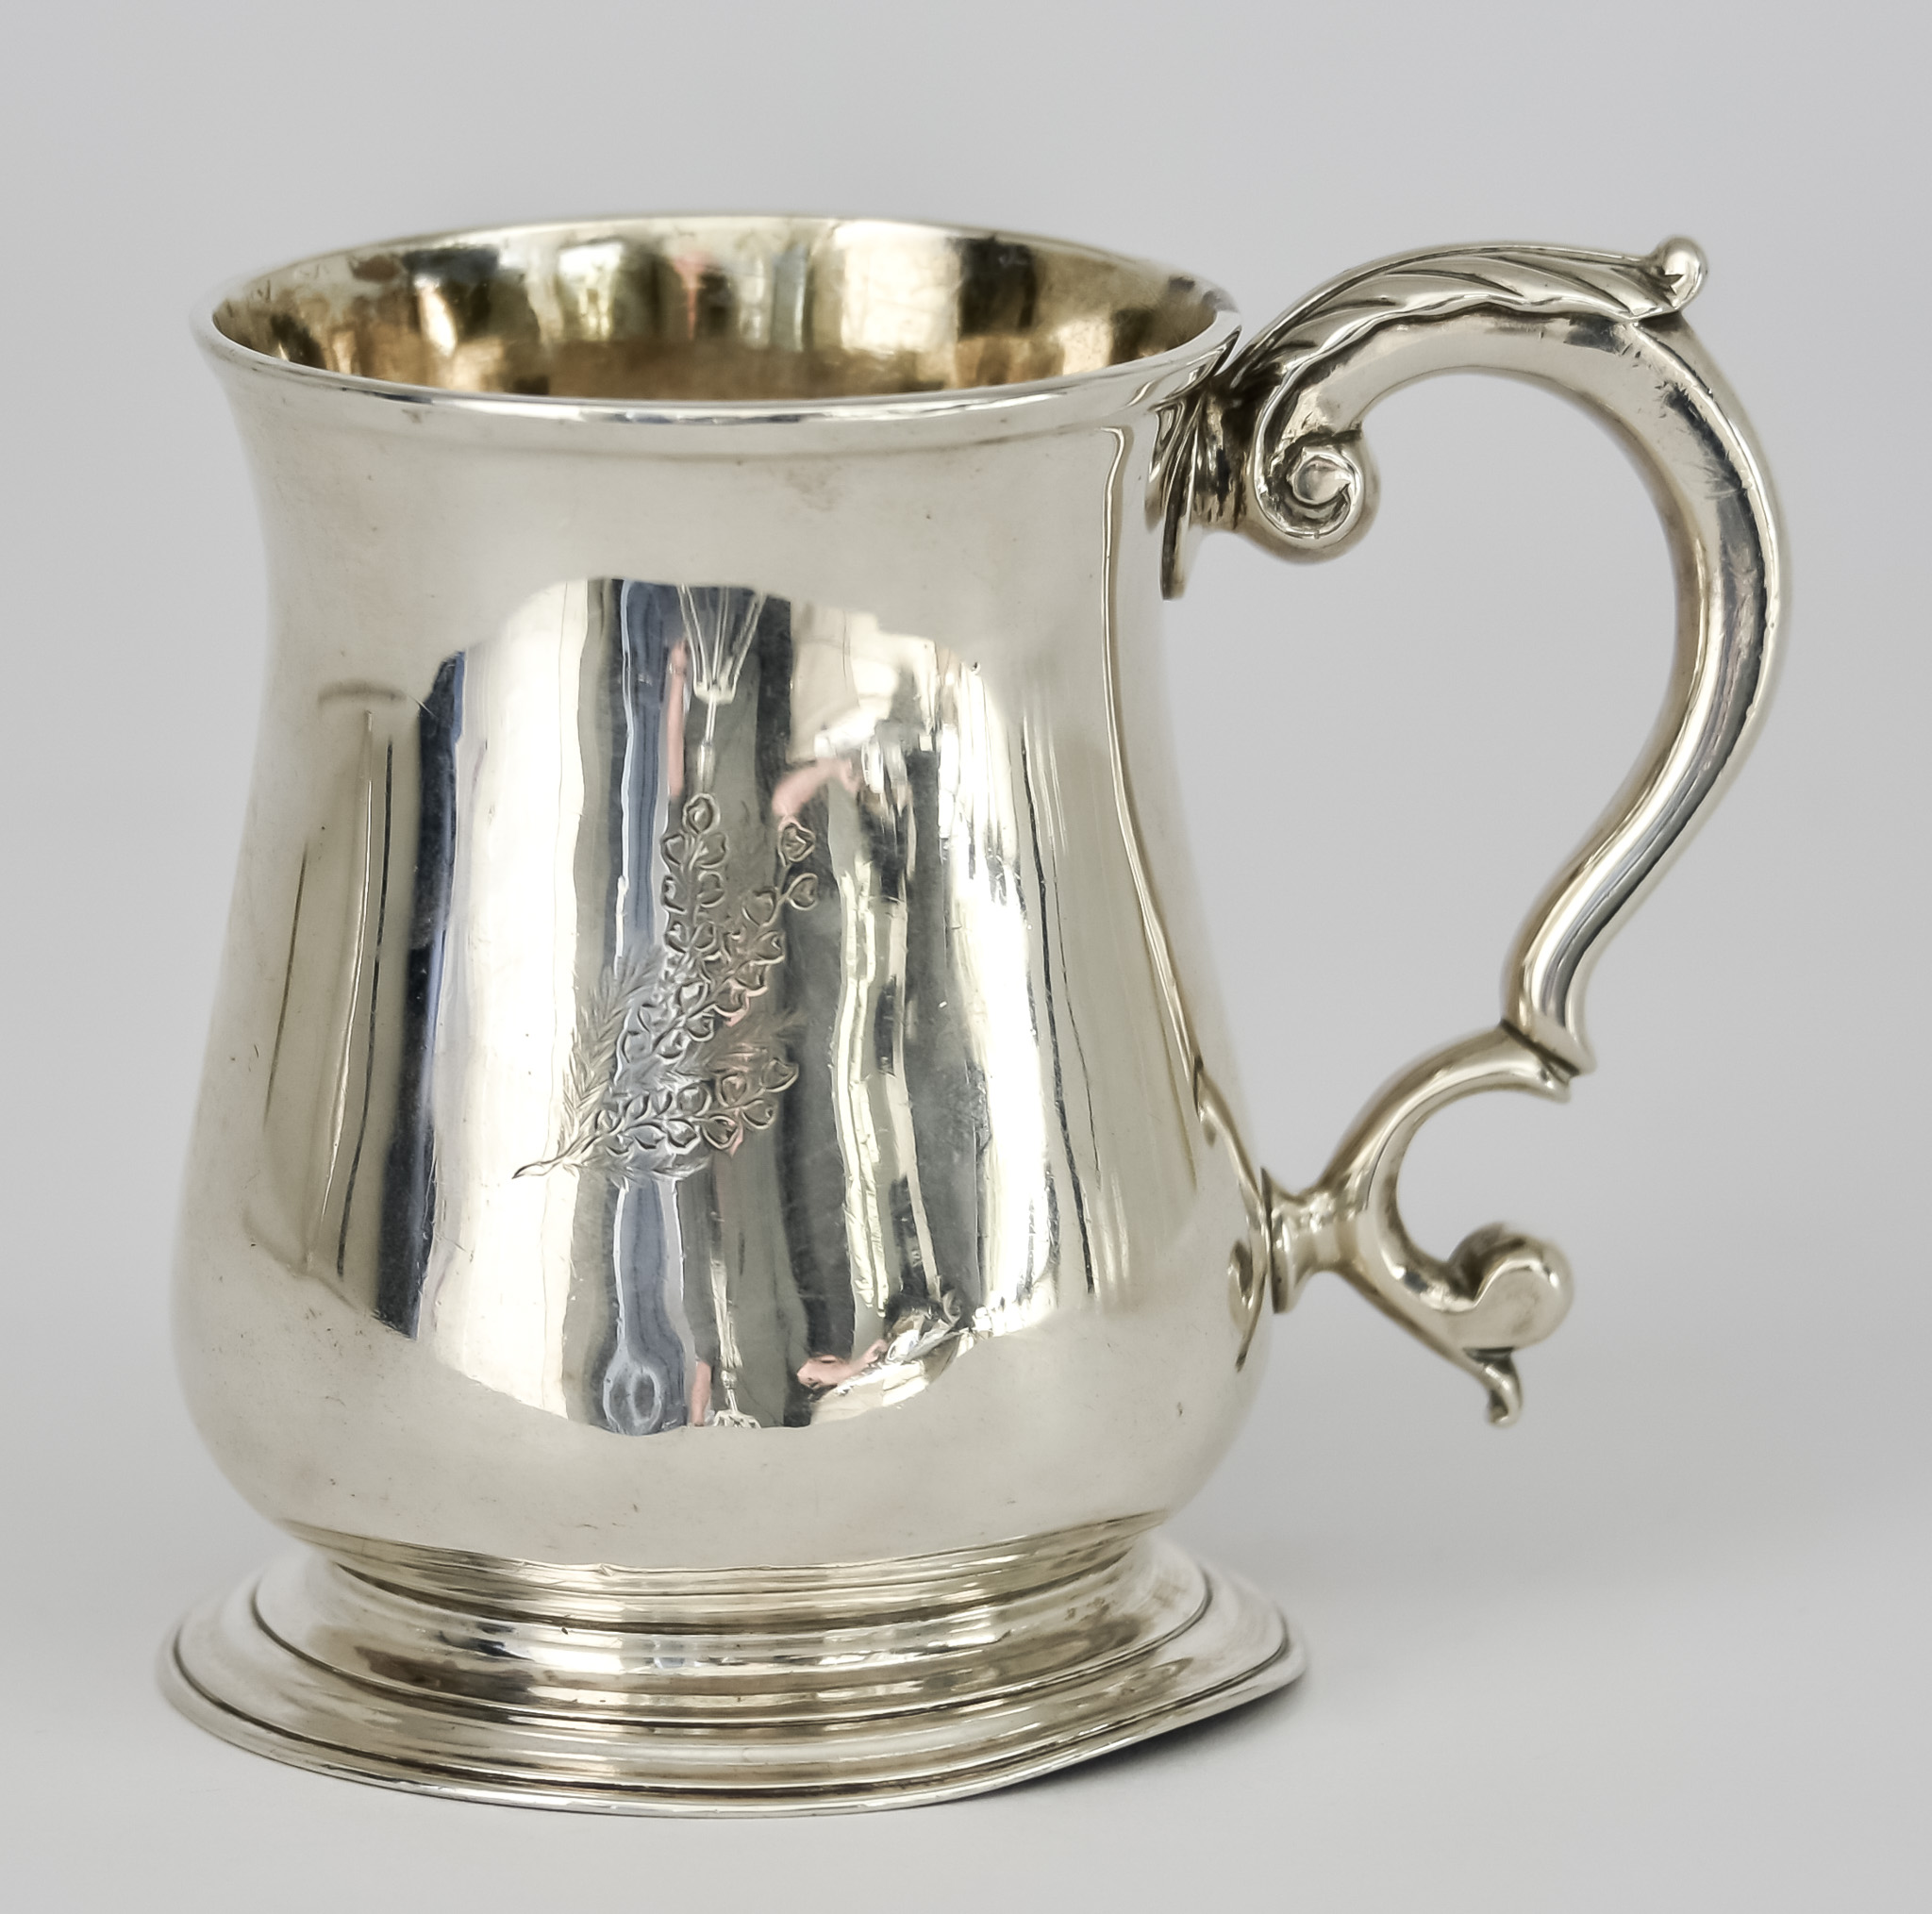 A George II Silver Mug, by Richard Gurney and Thomas Cook, London 1737, of baluster form engraved